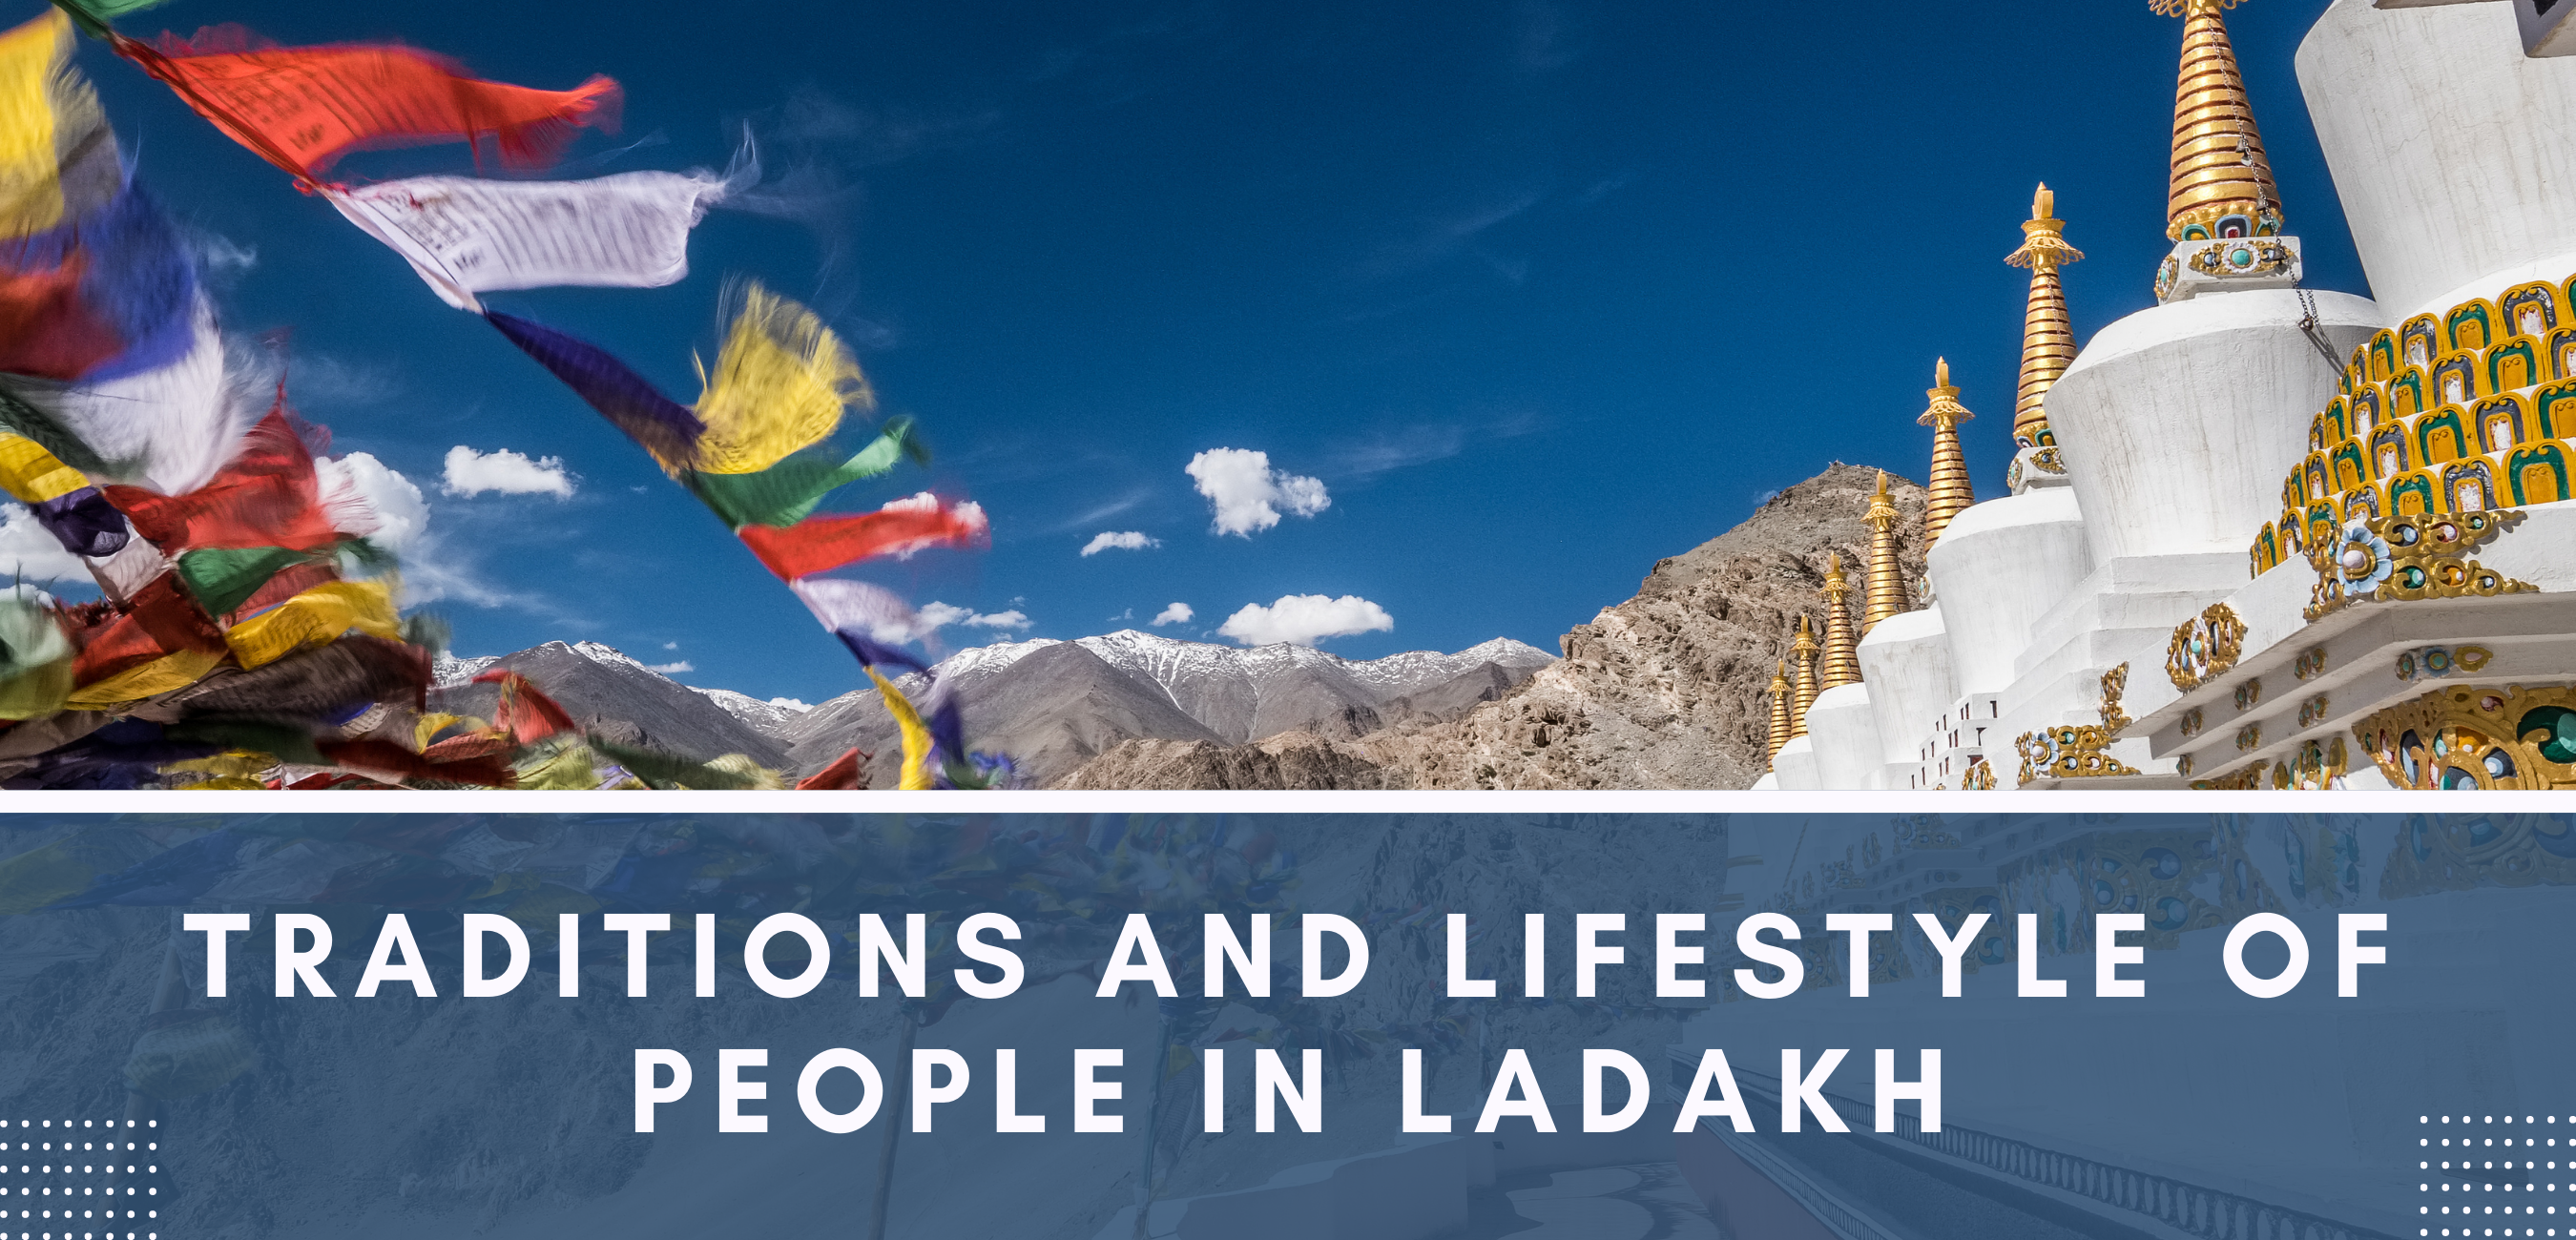 Traditions and lifestyle of people in Ladakh